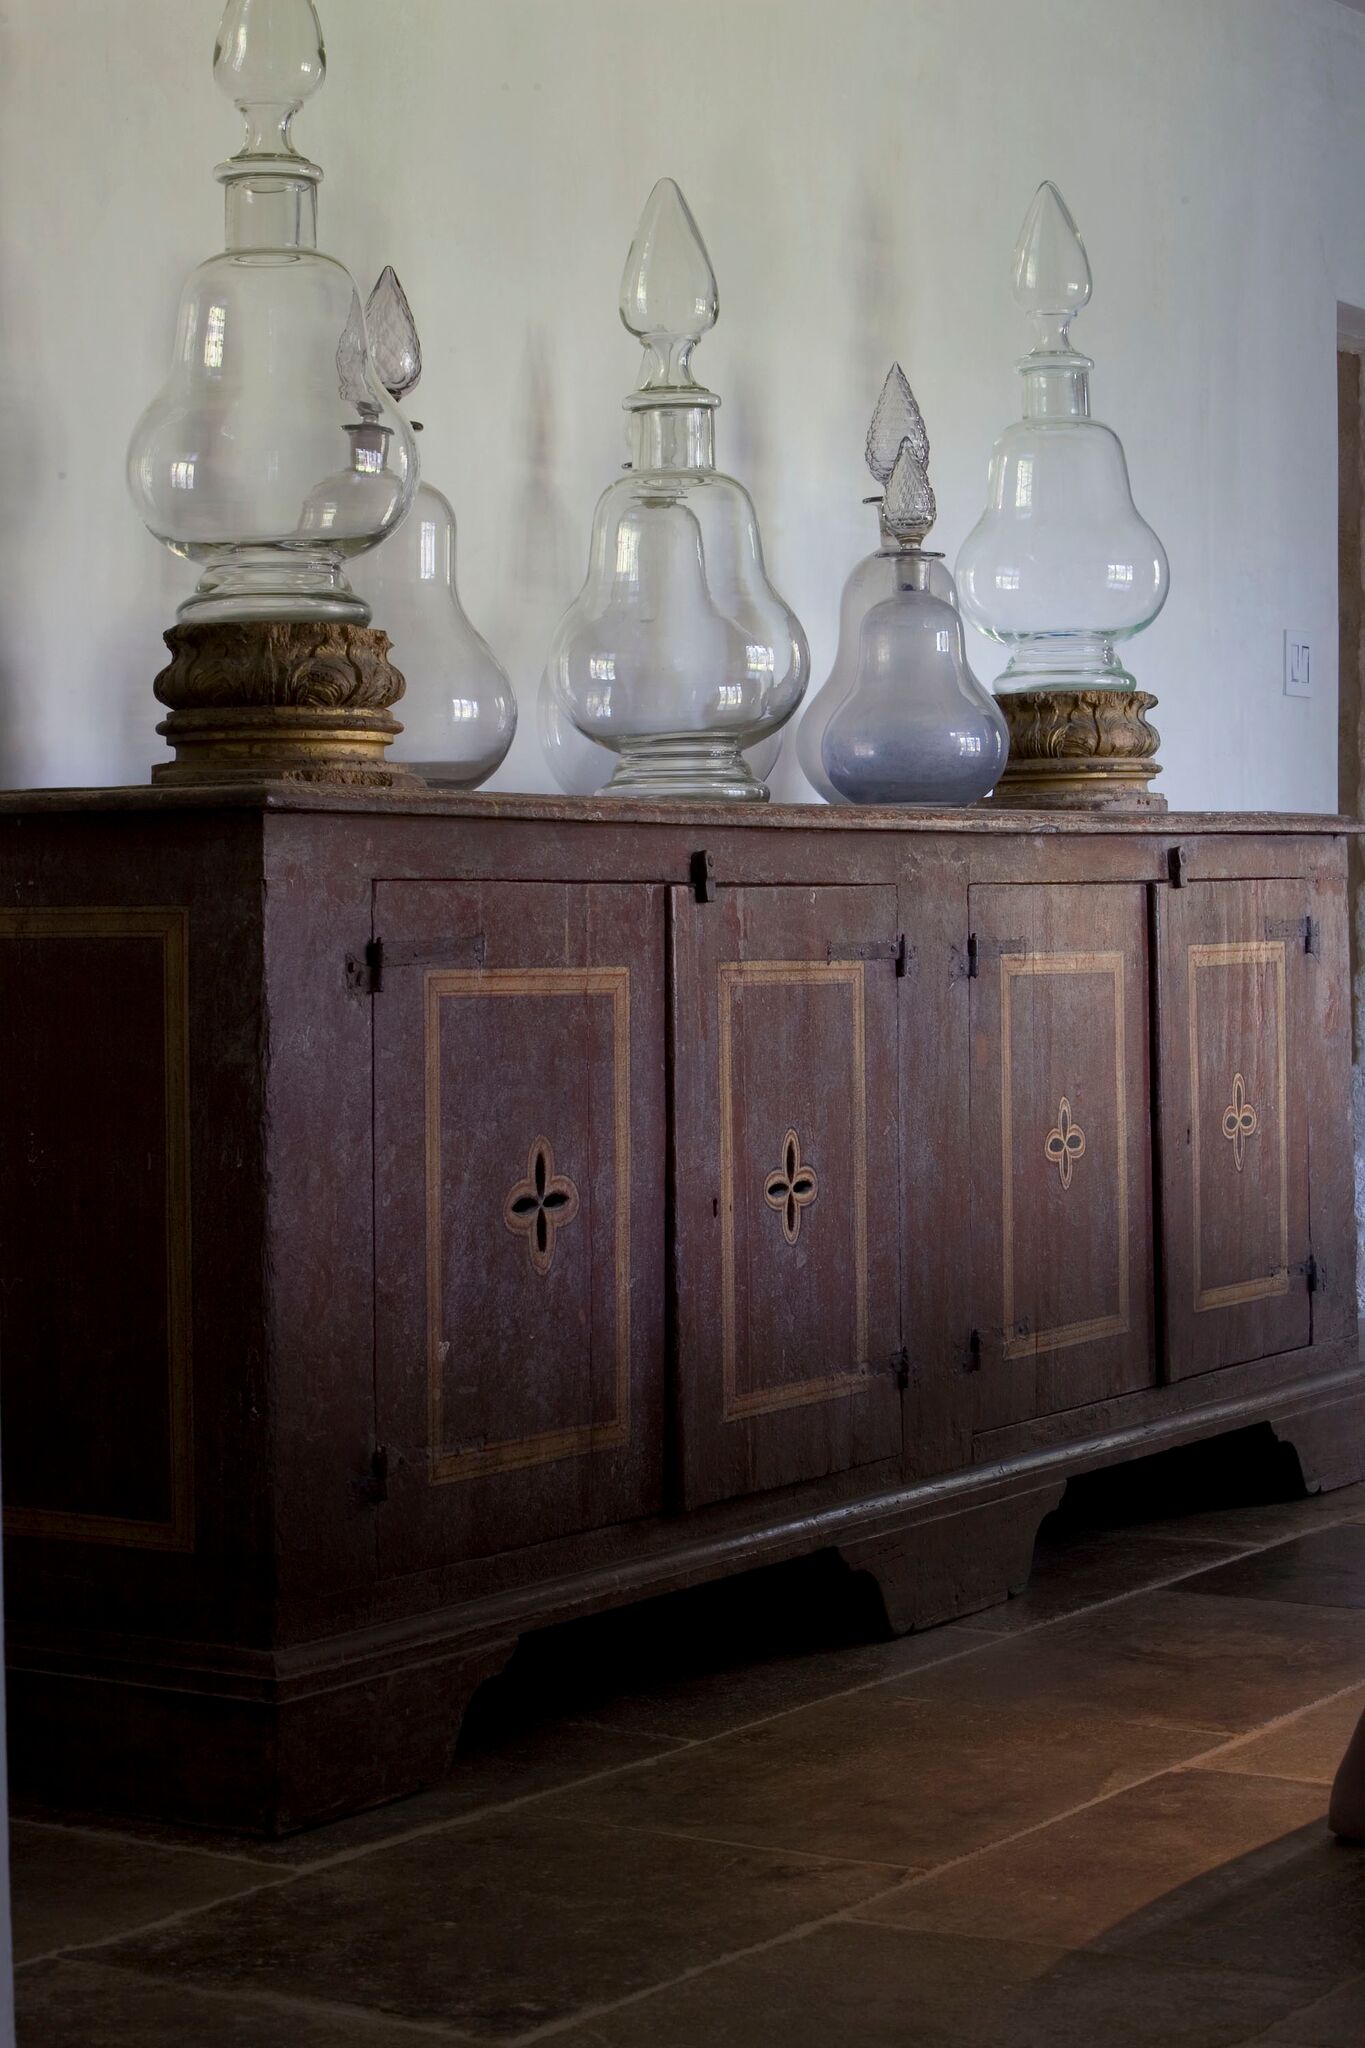 A sophisticated European country designed interior (Chateau Domingue and Pamela Pierce) is a breathlessly beautiful example of how to master elegant rustic refined European Country style. #frenchcountry #interiordesign #europeanantiques #oldworldstyle #rusticdecor #Frenchhome #housetour